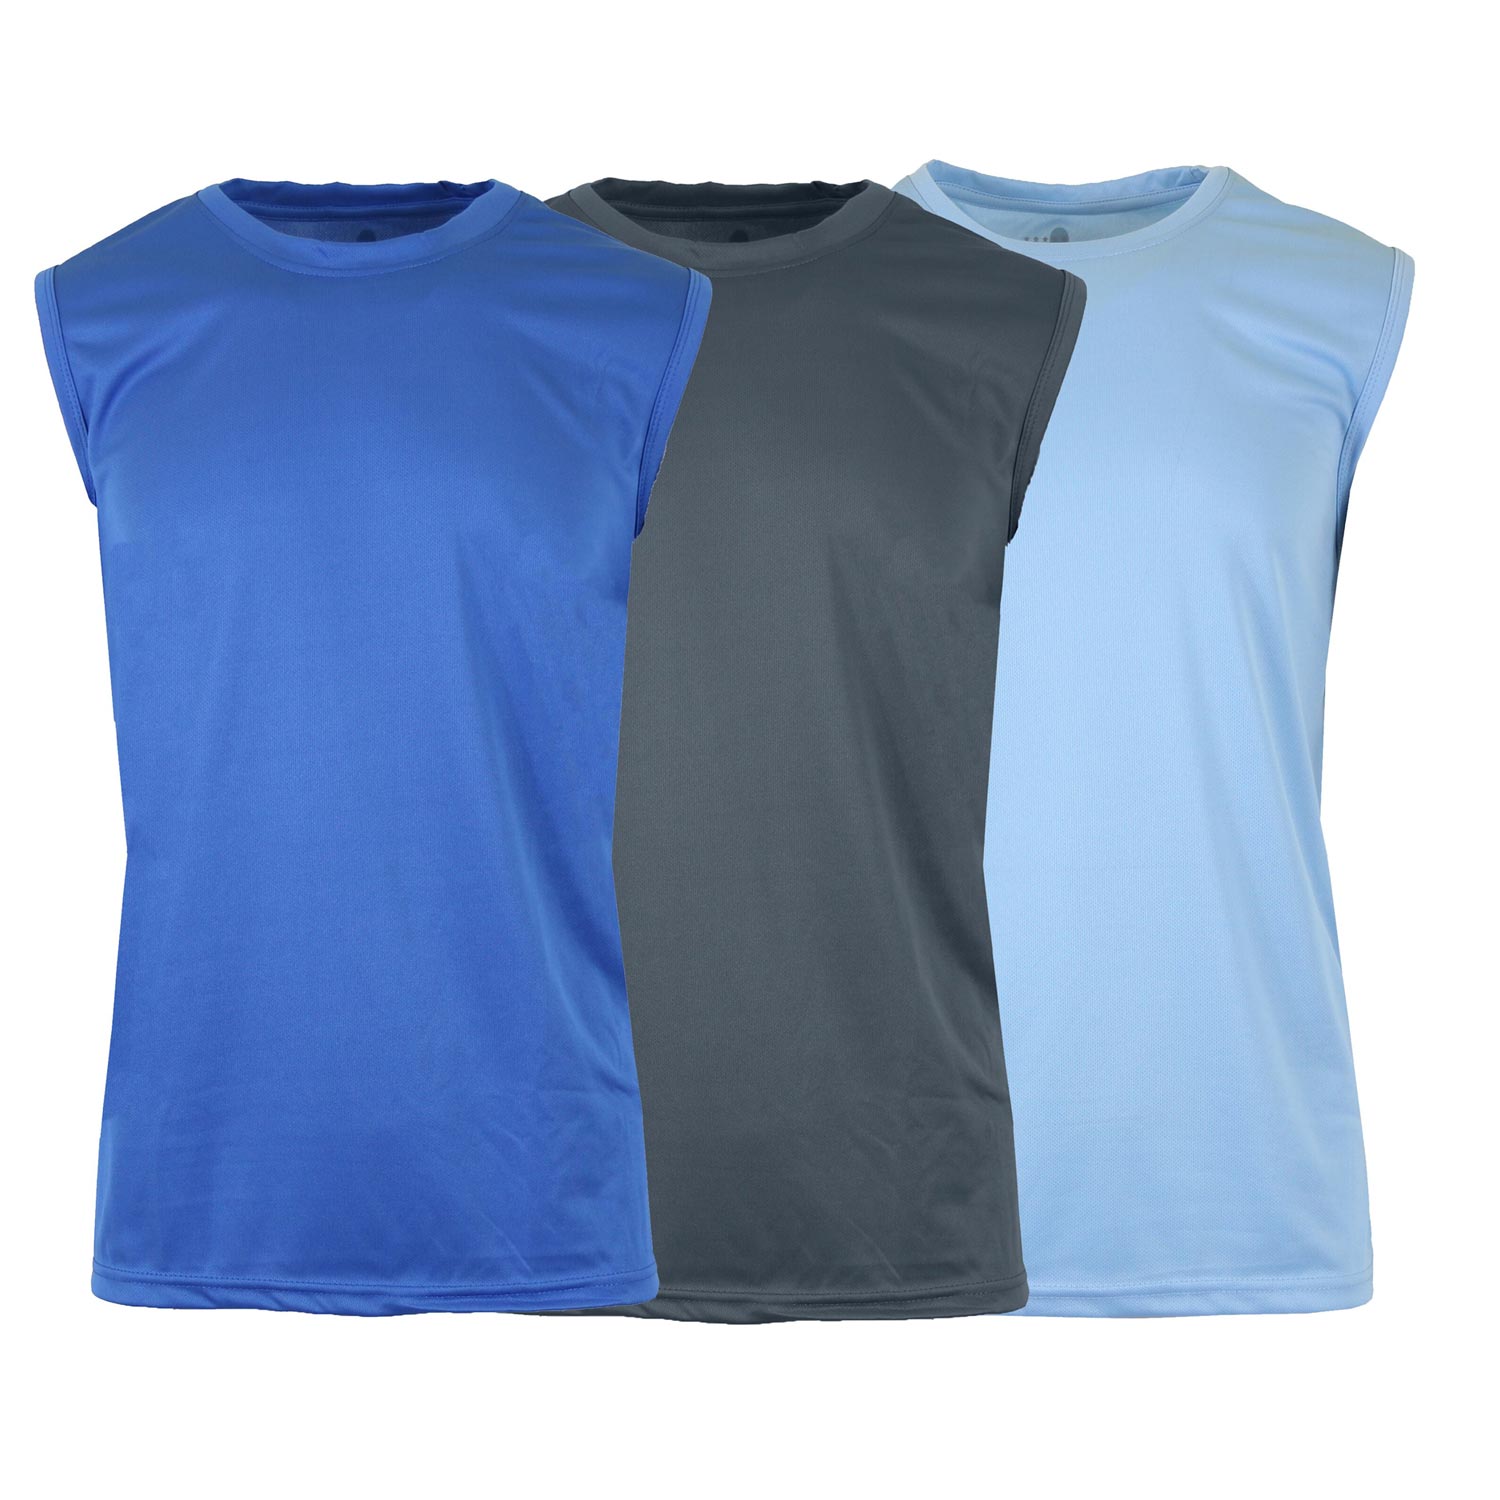 3 Pack Men's Moisture-Wicking Activewear Performance Muscle Tee